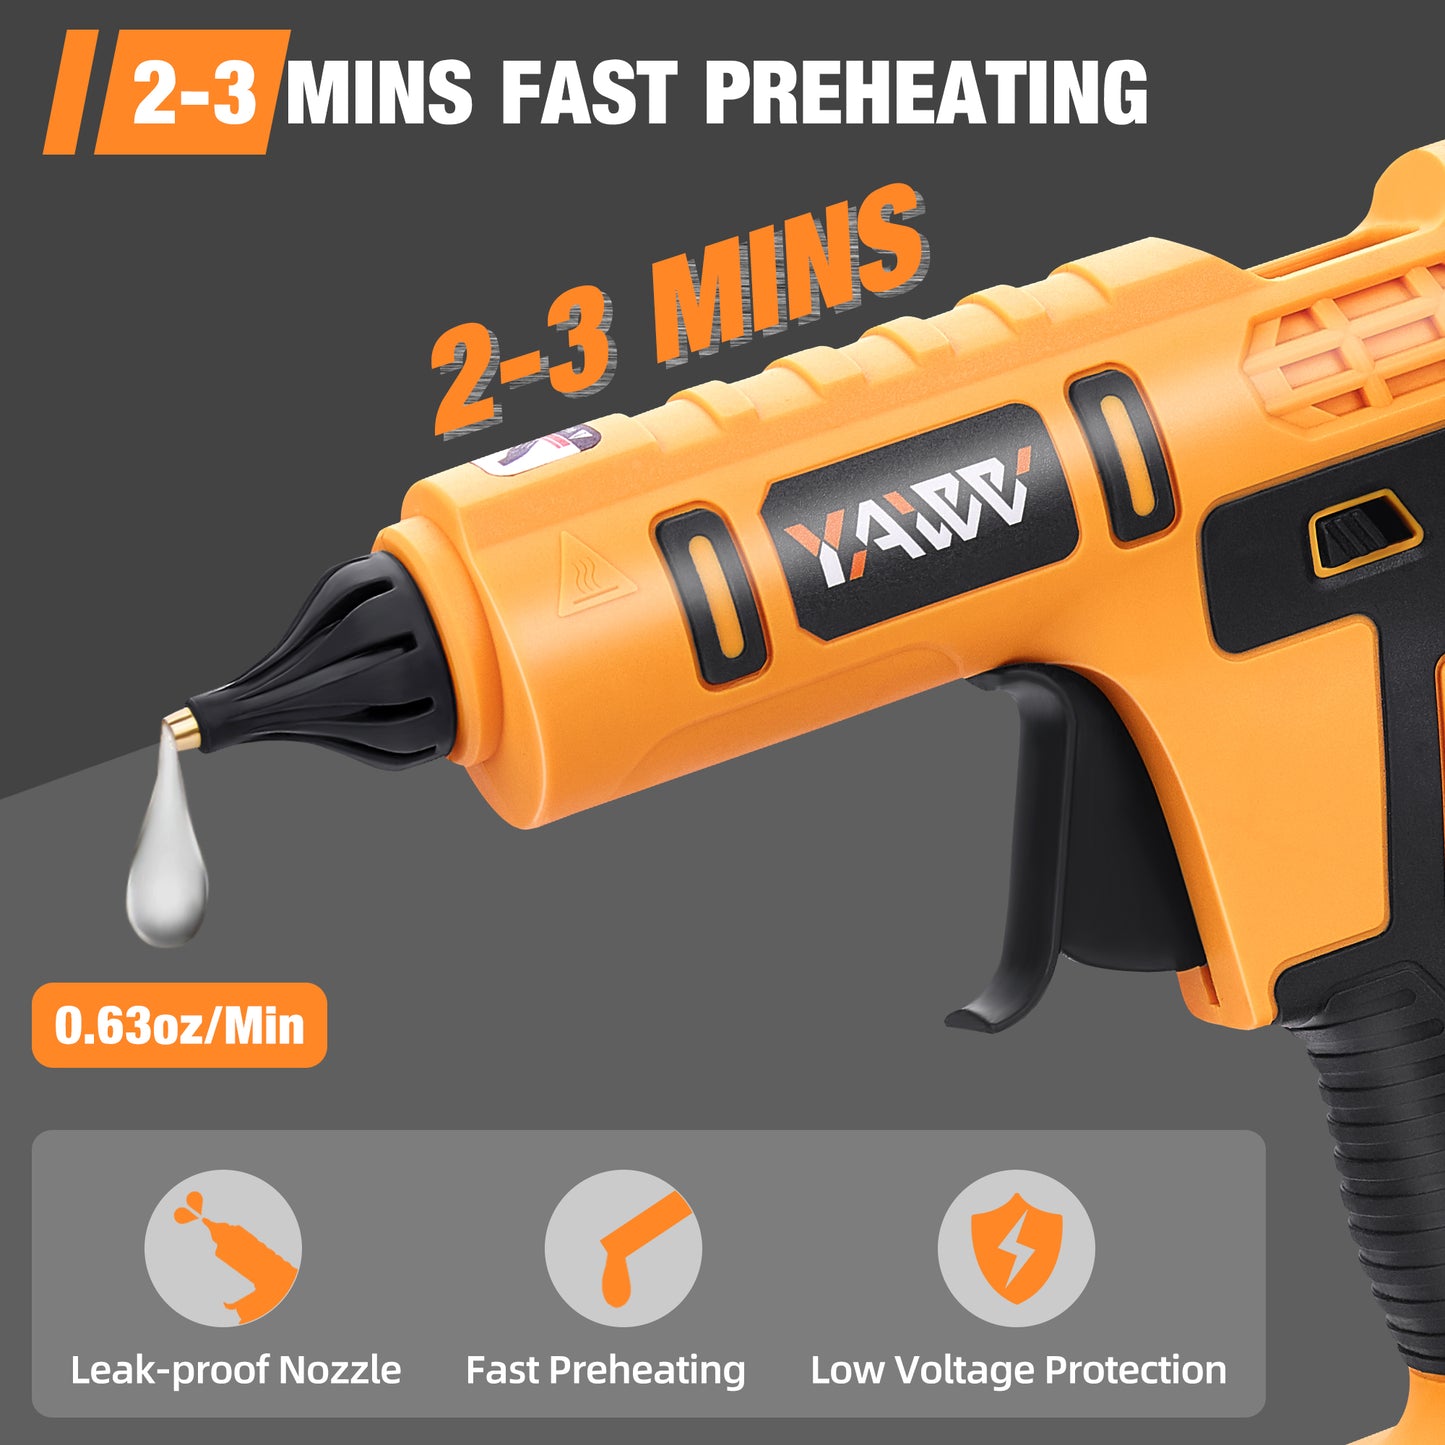 Cordless Hot Glue Gun for DEWALT 20V Max Battery,Drip-free Handheld Electric Power Glue Gun Full Size with 20pcs Glue Sticks,Wireless Glue Gun for Arts Crafts DIY Home Quick Repairs(Battery Not Included)